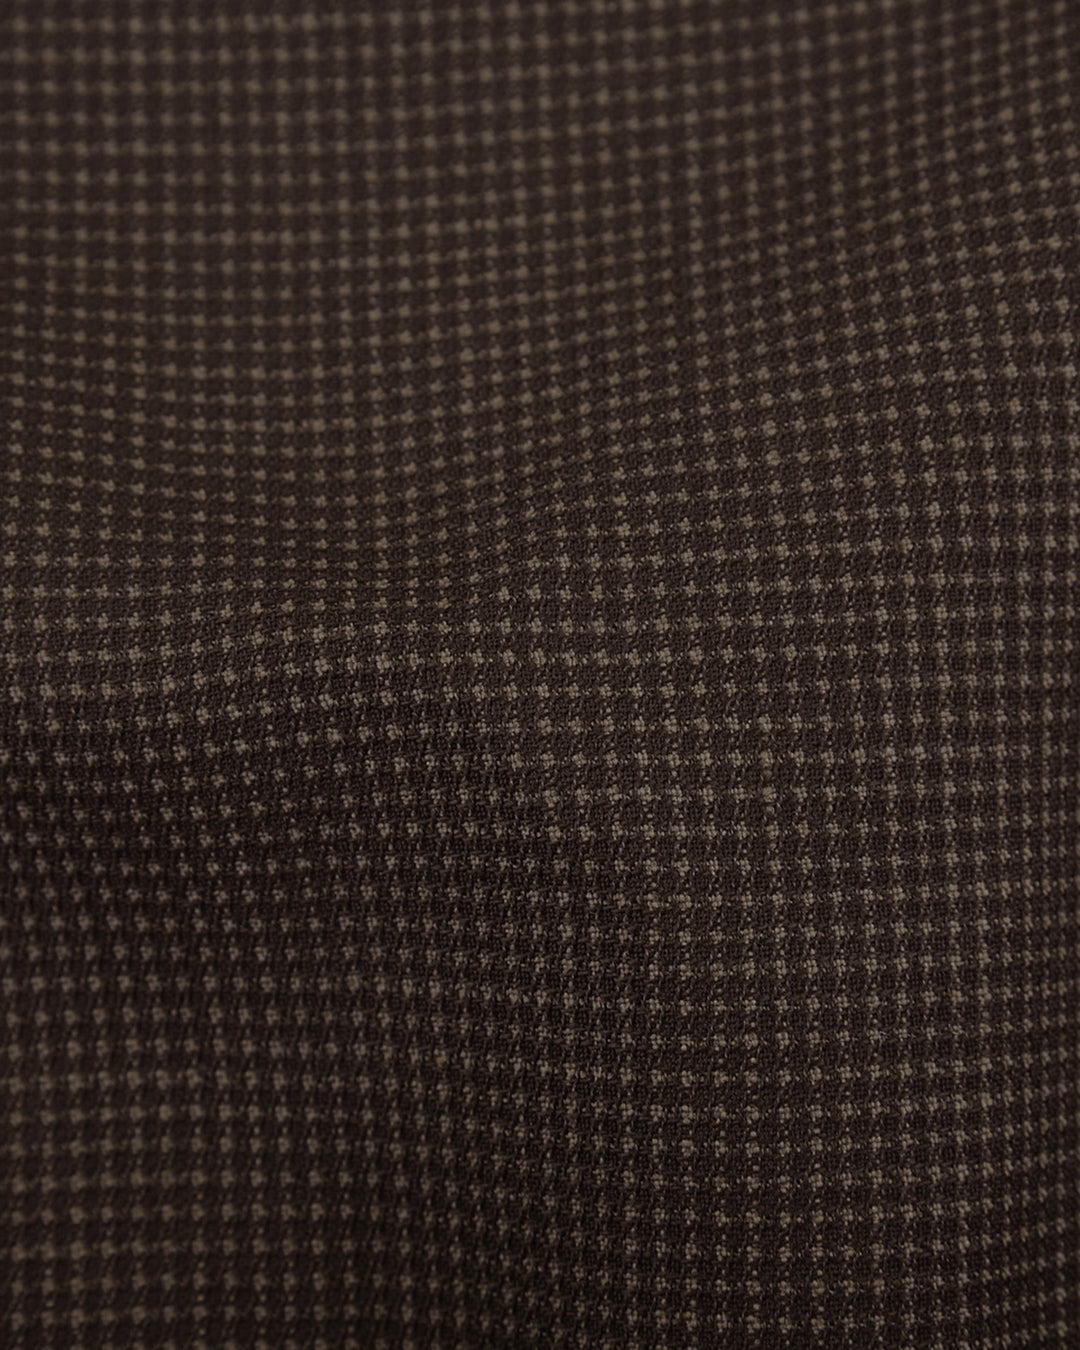 Drapers Tobacco Brown Micro Houndstooth Pants